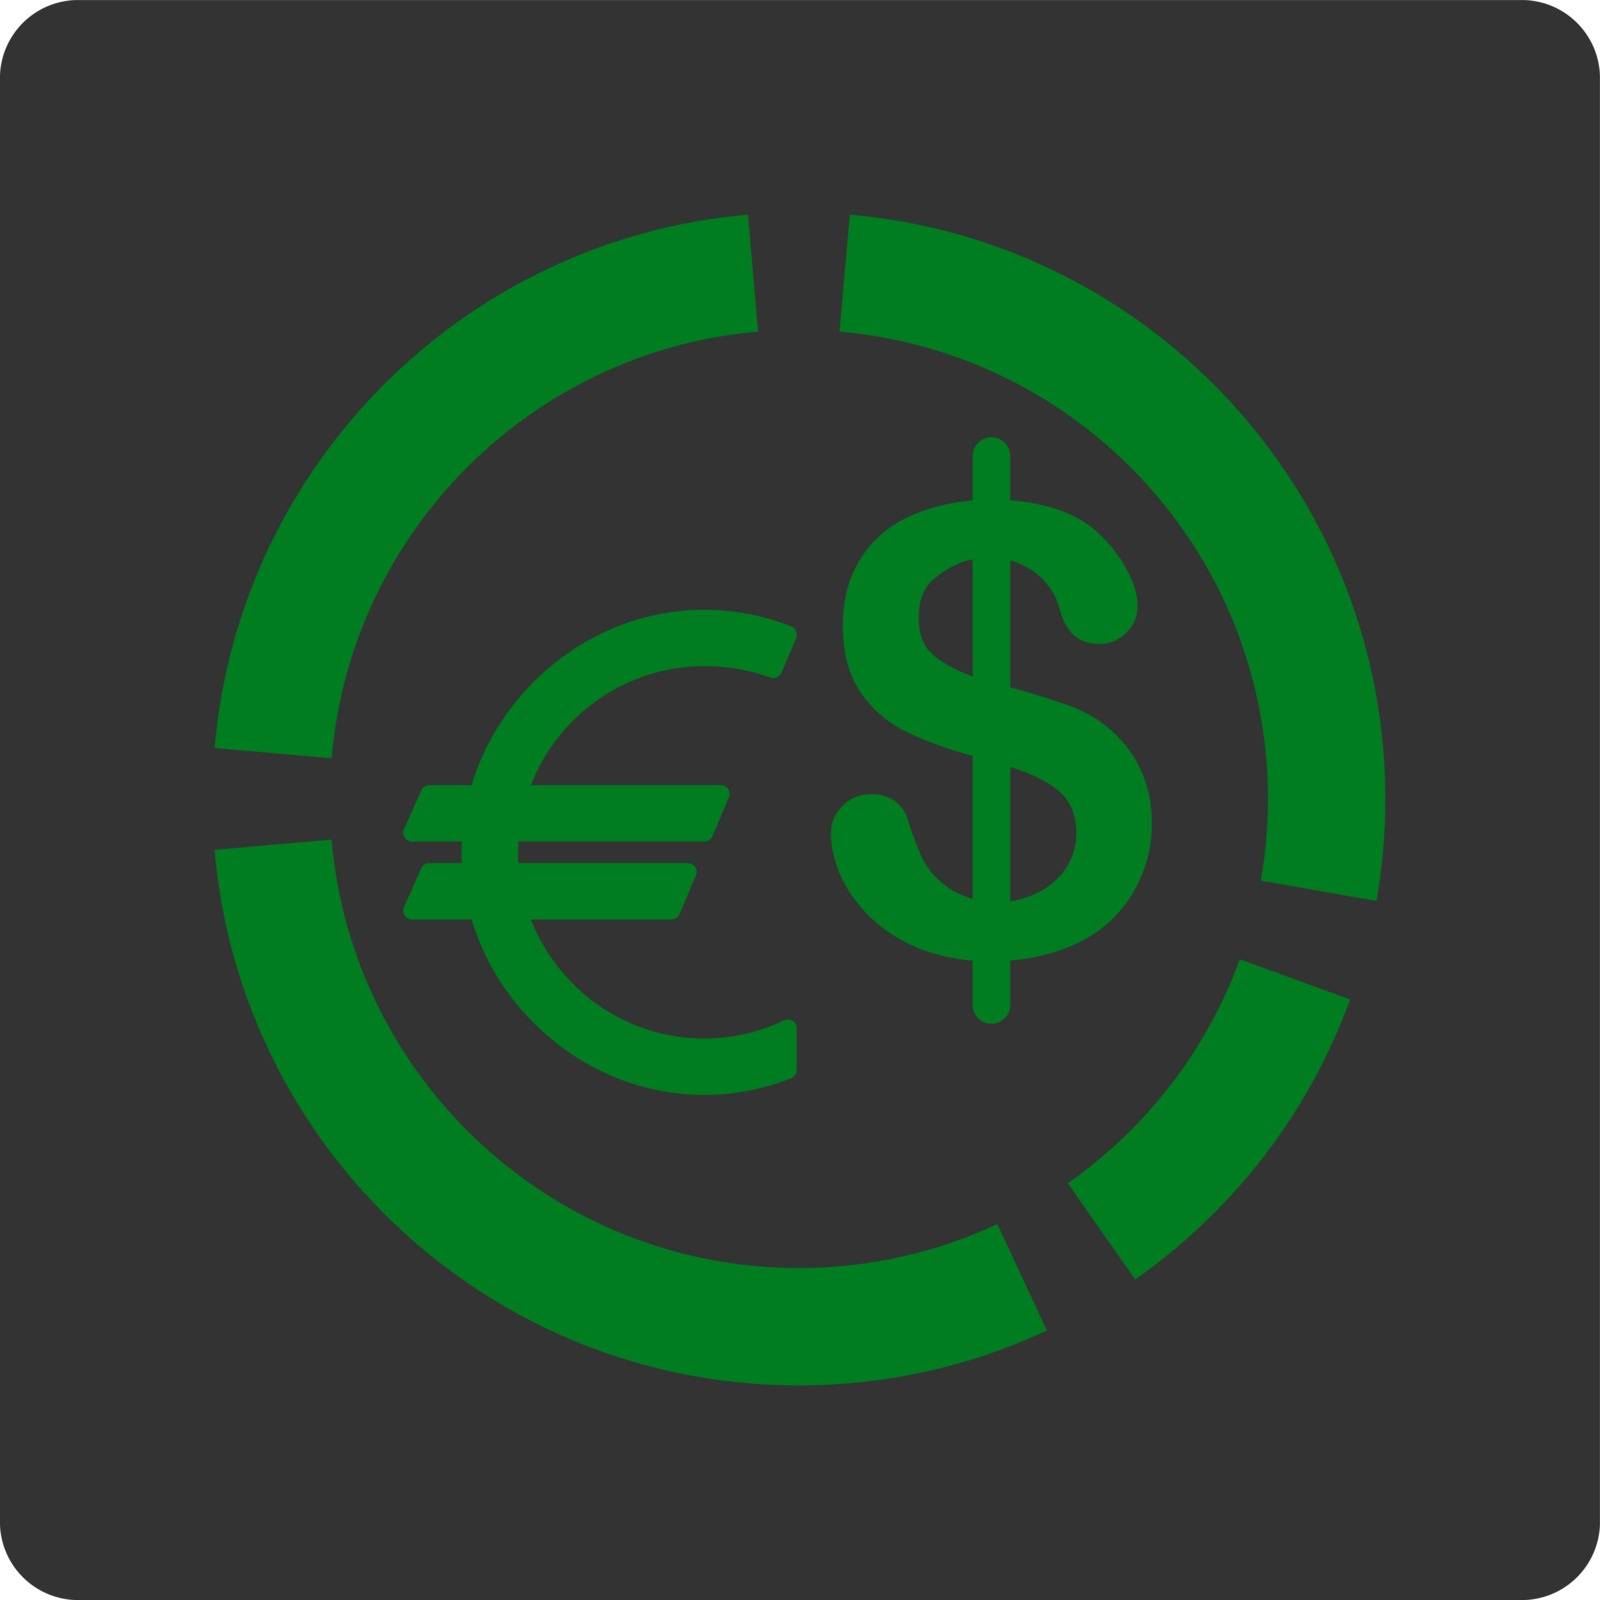 Currency Diagram vector icon. This flat rounded square button uses green and gray colors and isolated on a white background.